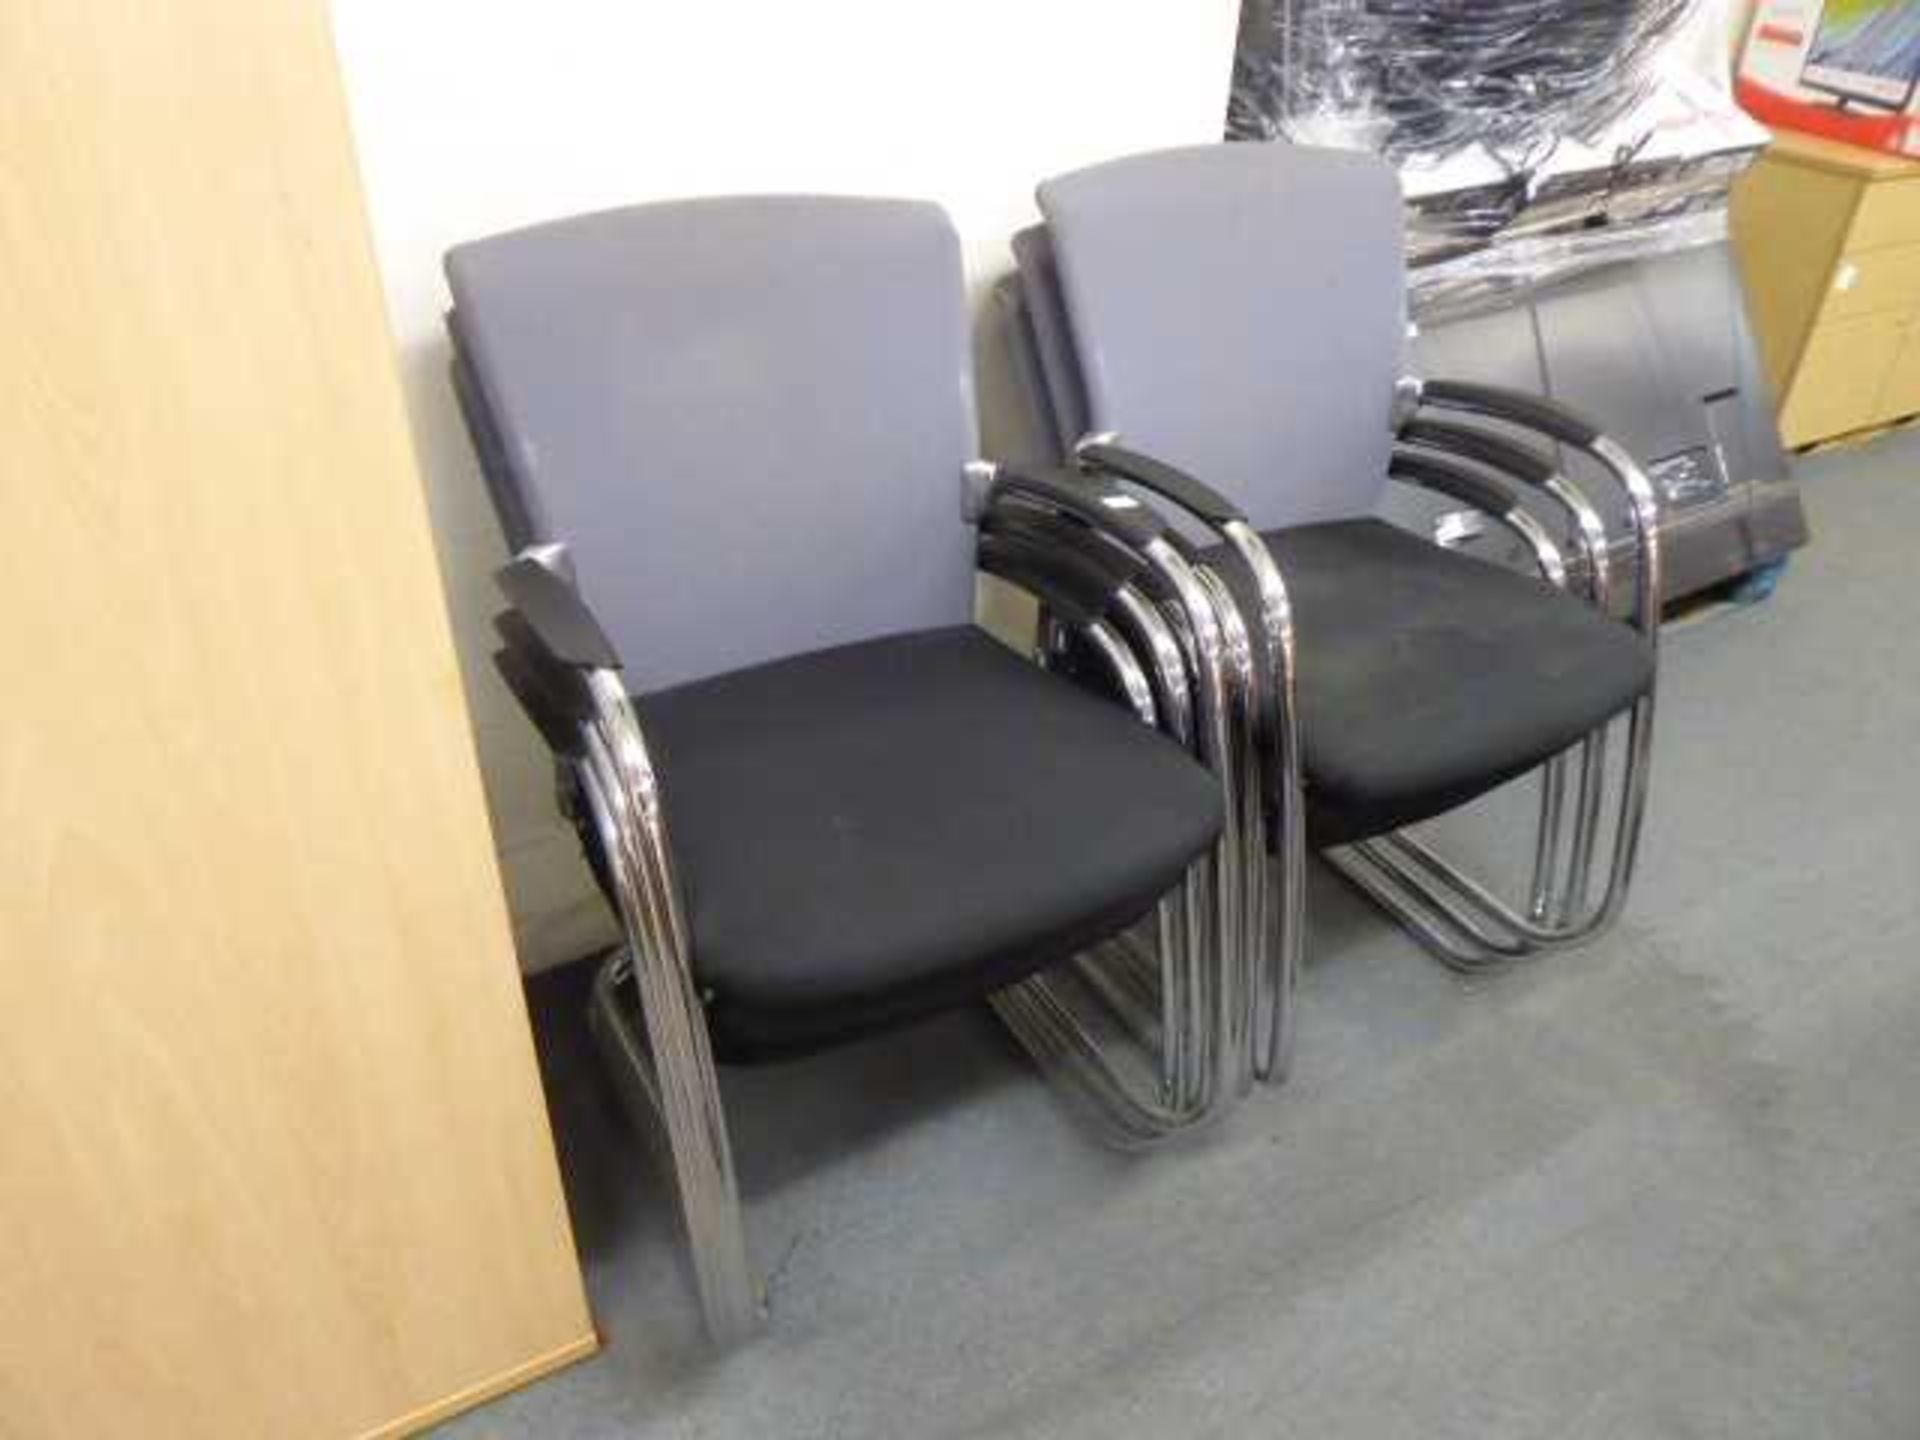 6 Sedus cantilever stacking chairs in grey and black